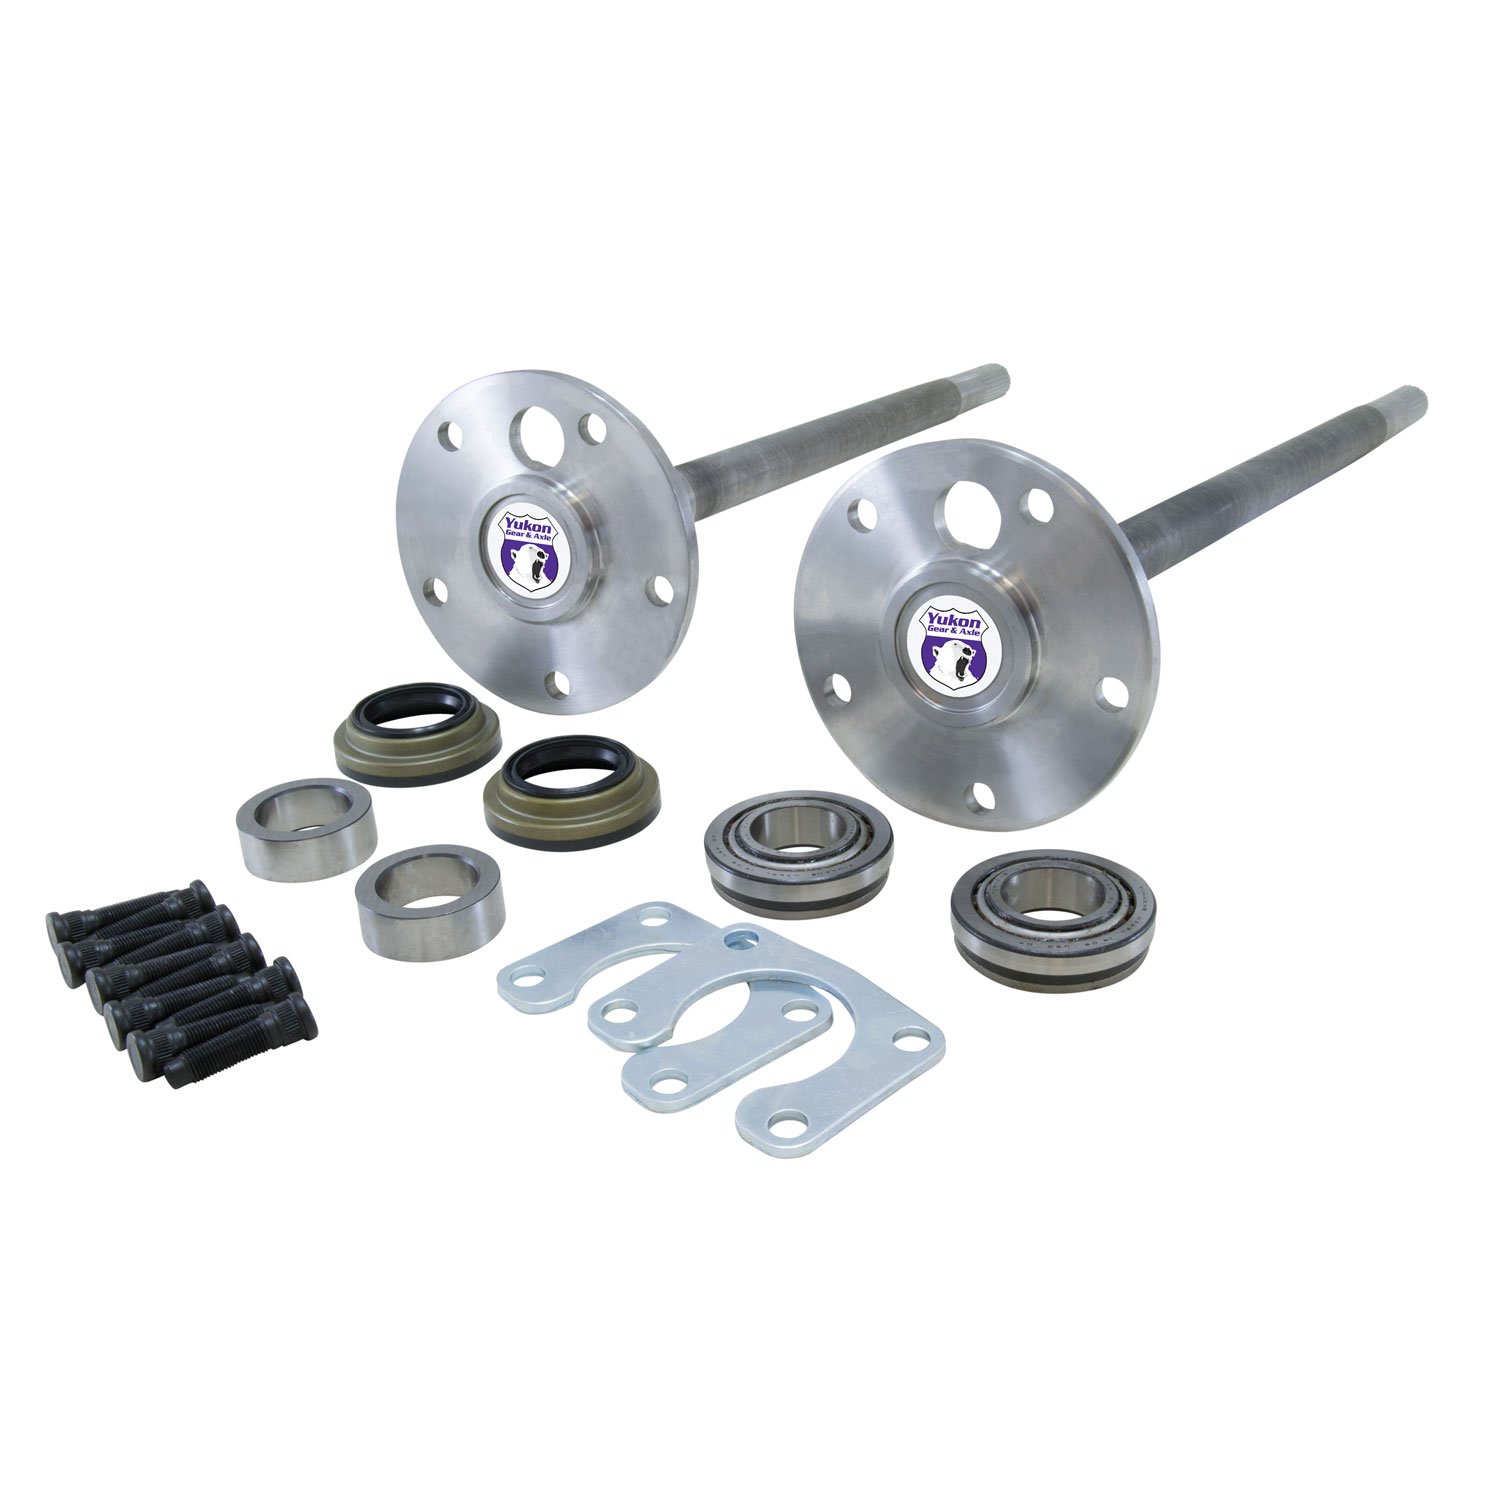 1541H Alloy Rear Axle Kit For Ford 9 in. Bronco From '66-'75 With 28 Splines